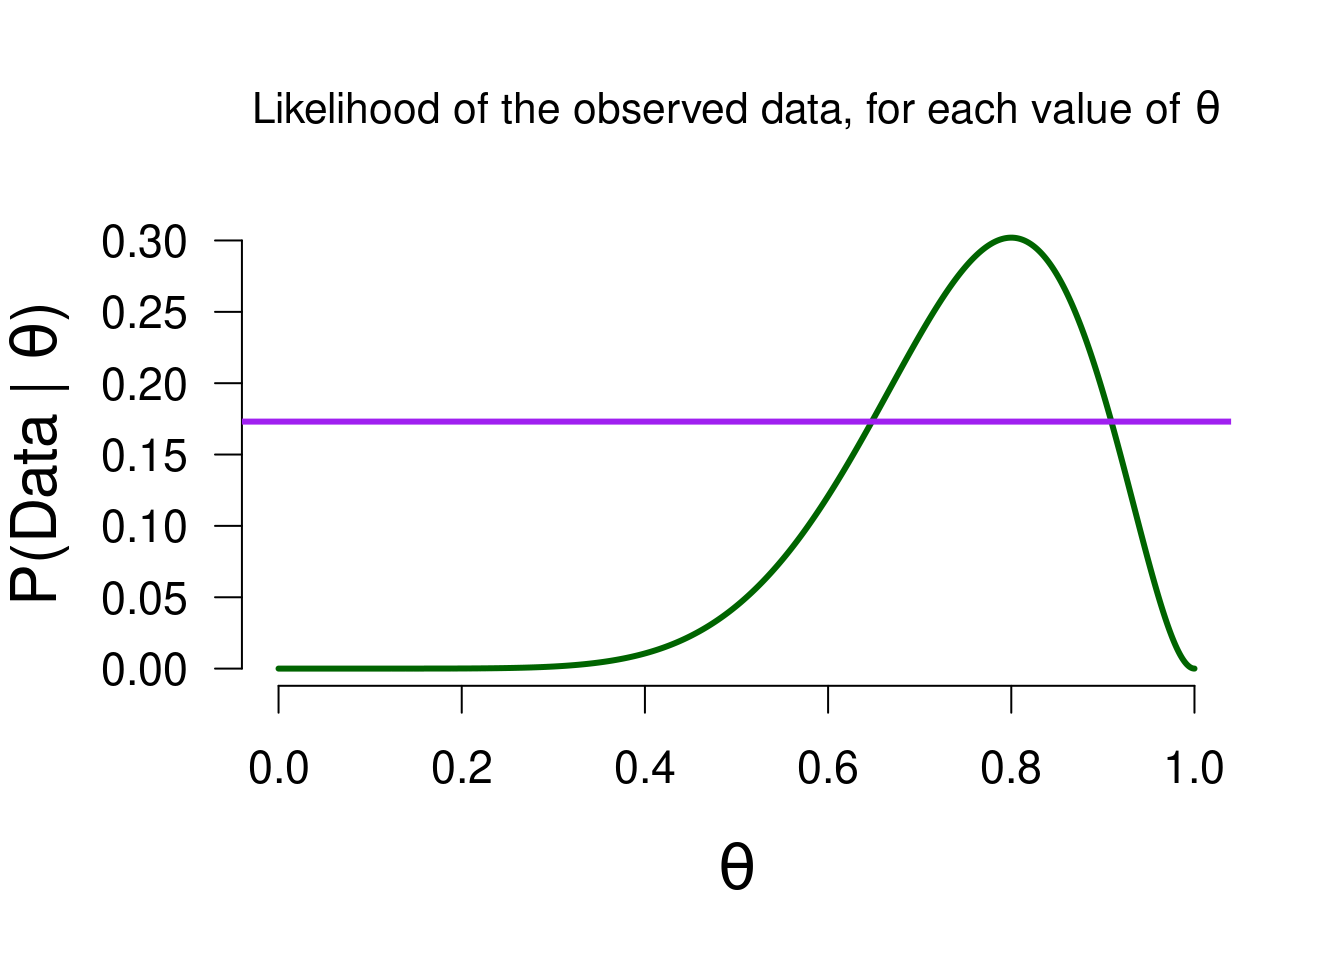 The likelihood of observing 8 heads out of 10 flips, for all possible values of theta. The purple line is the marginal likelihood of David's model, to visualize which values predicted the observed data better than average.